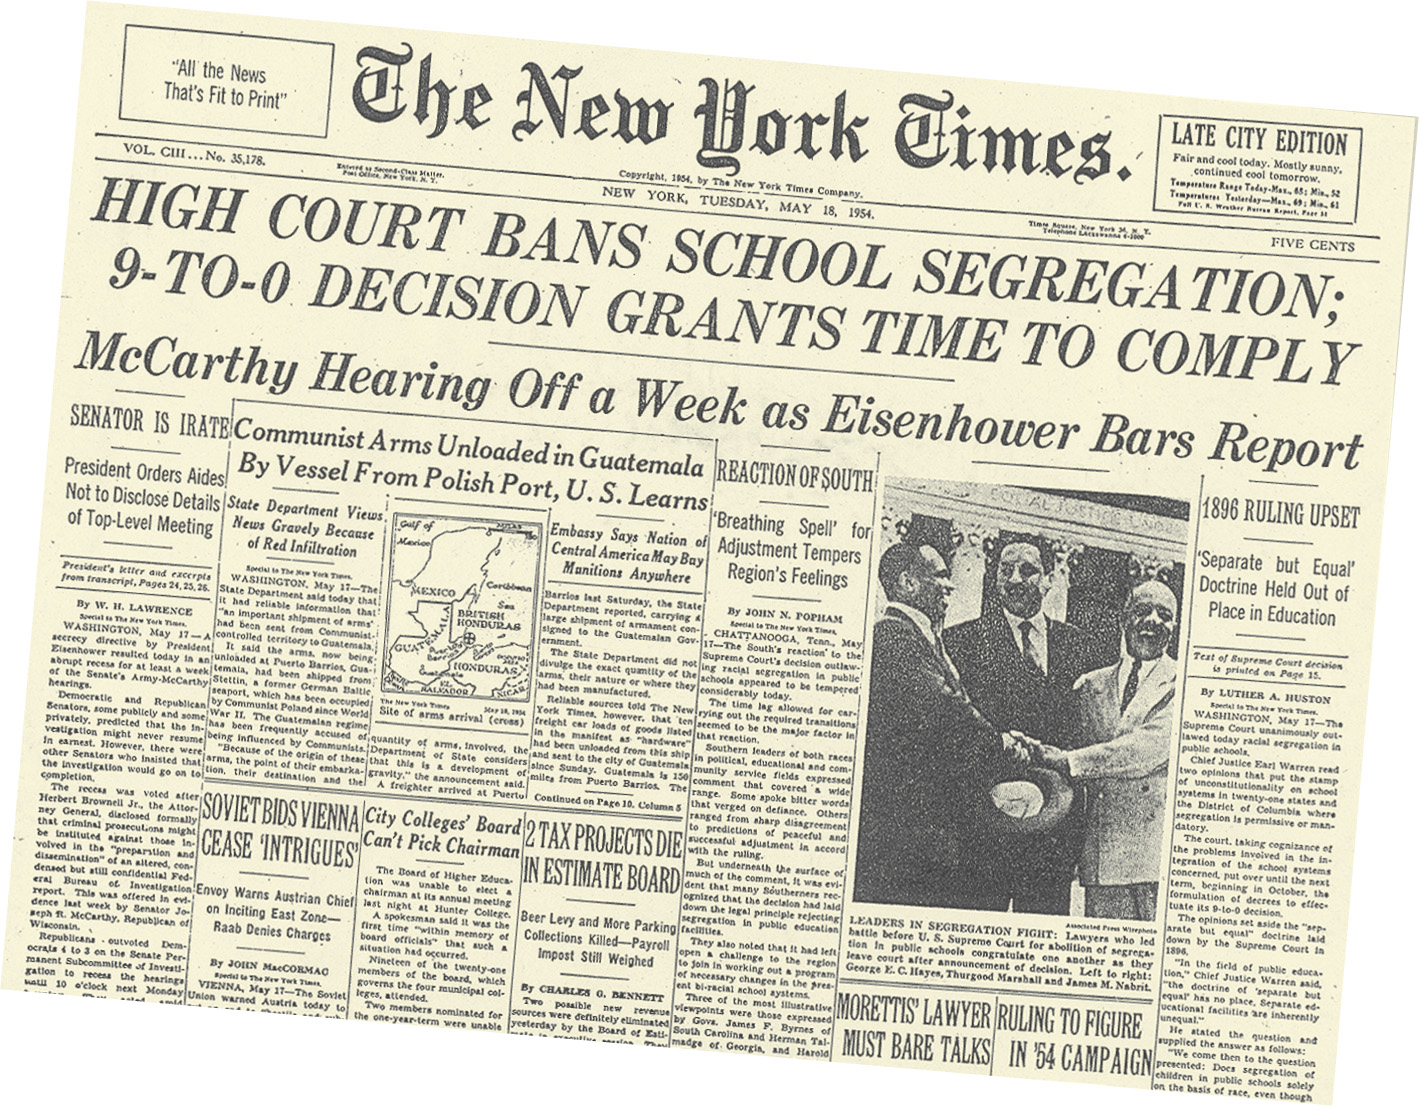 The front page headline of the New York Times: High Court Bans School Segregation.